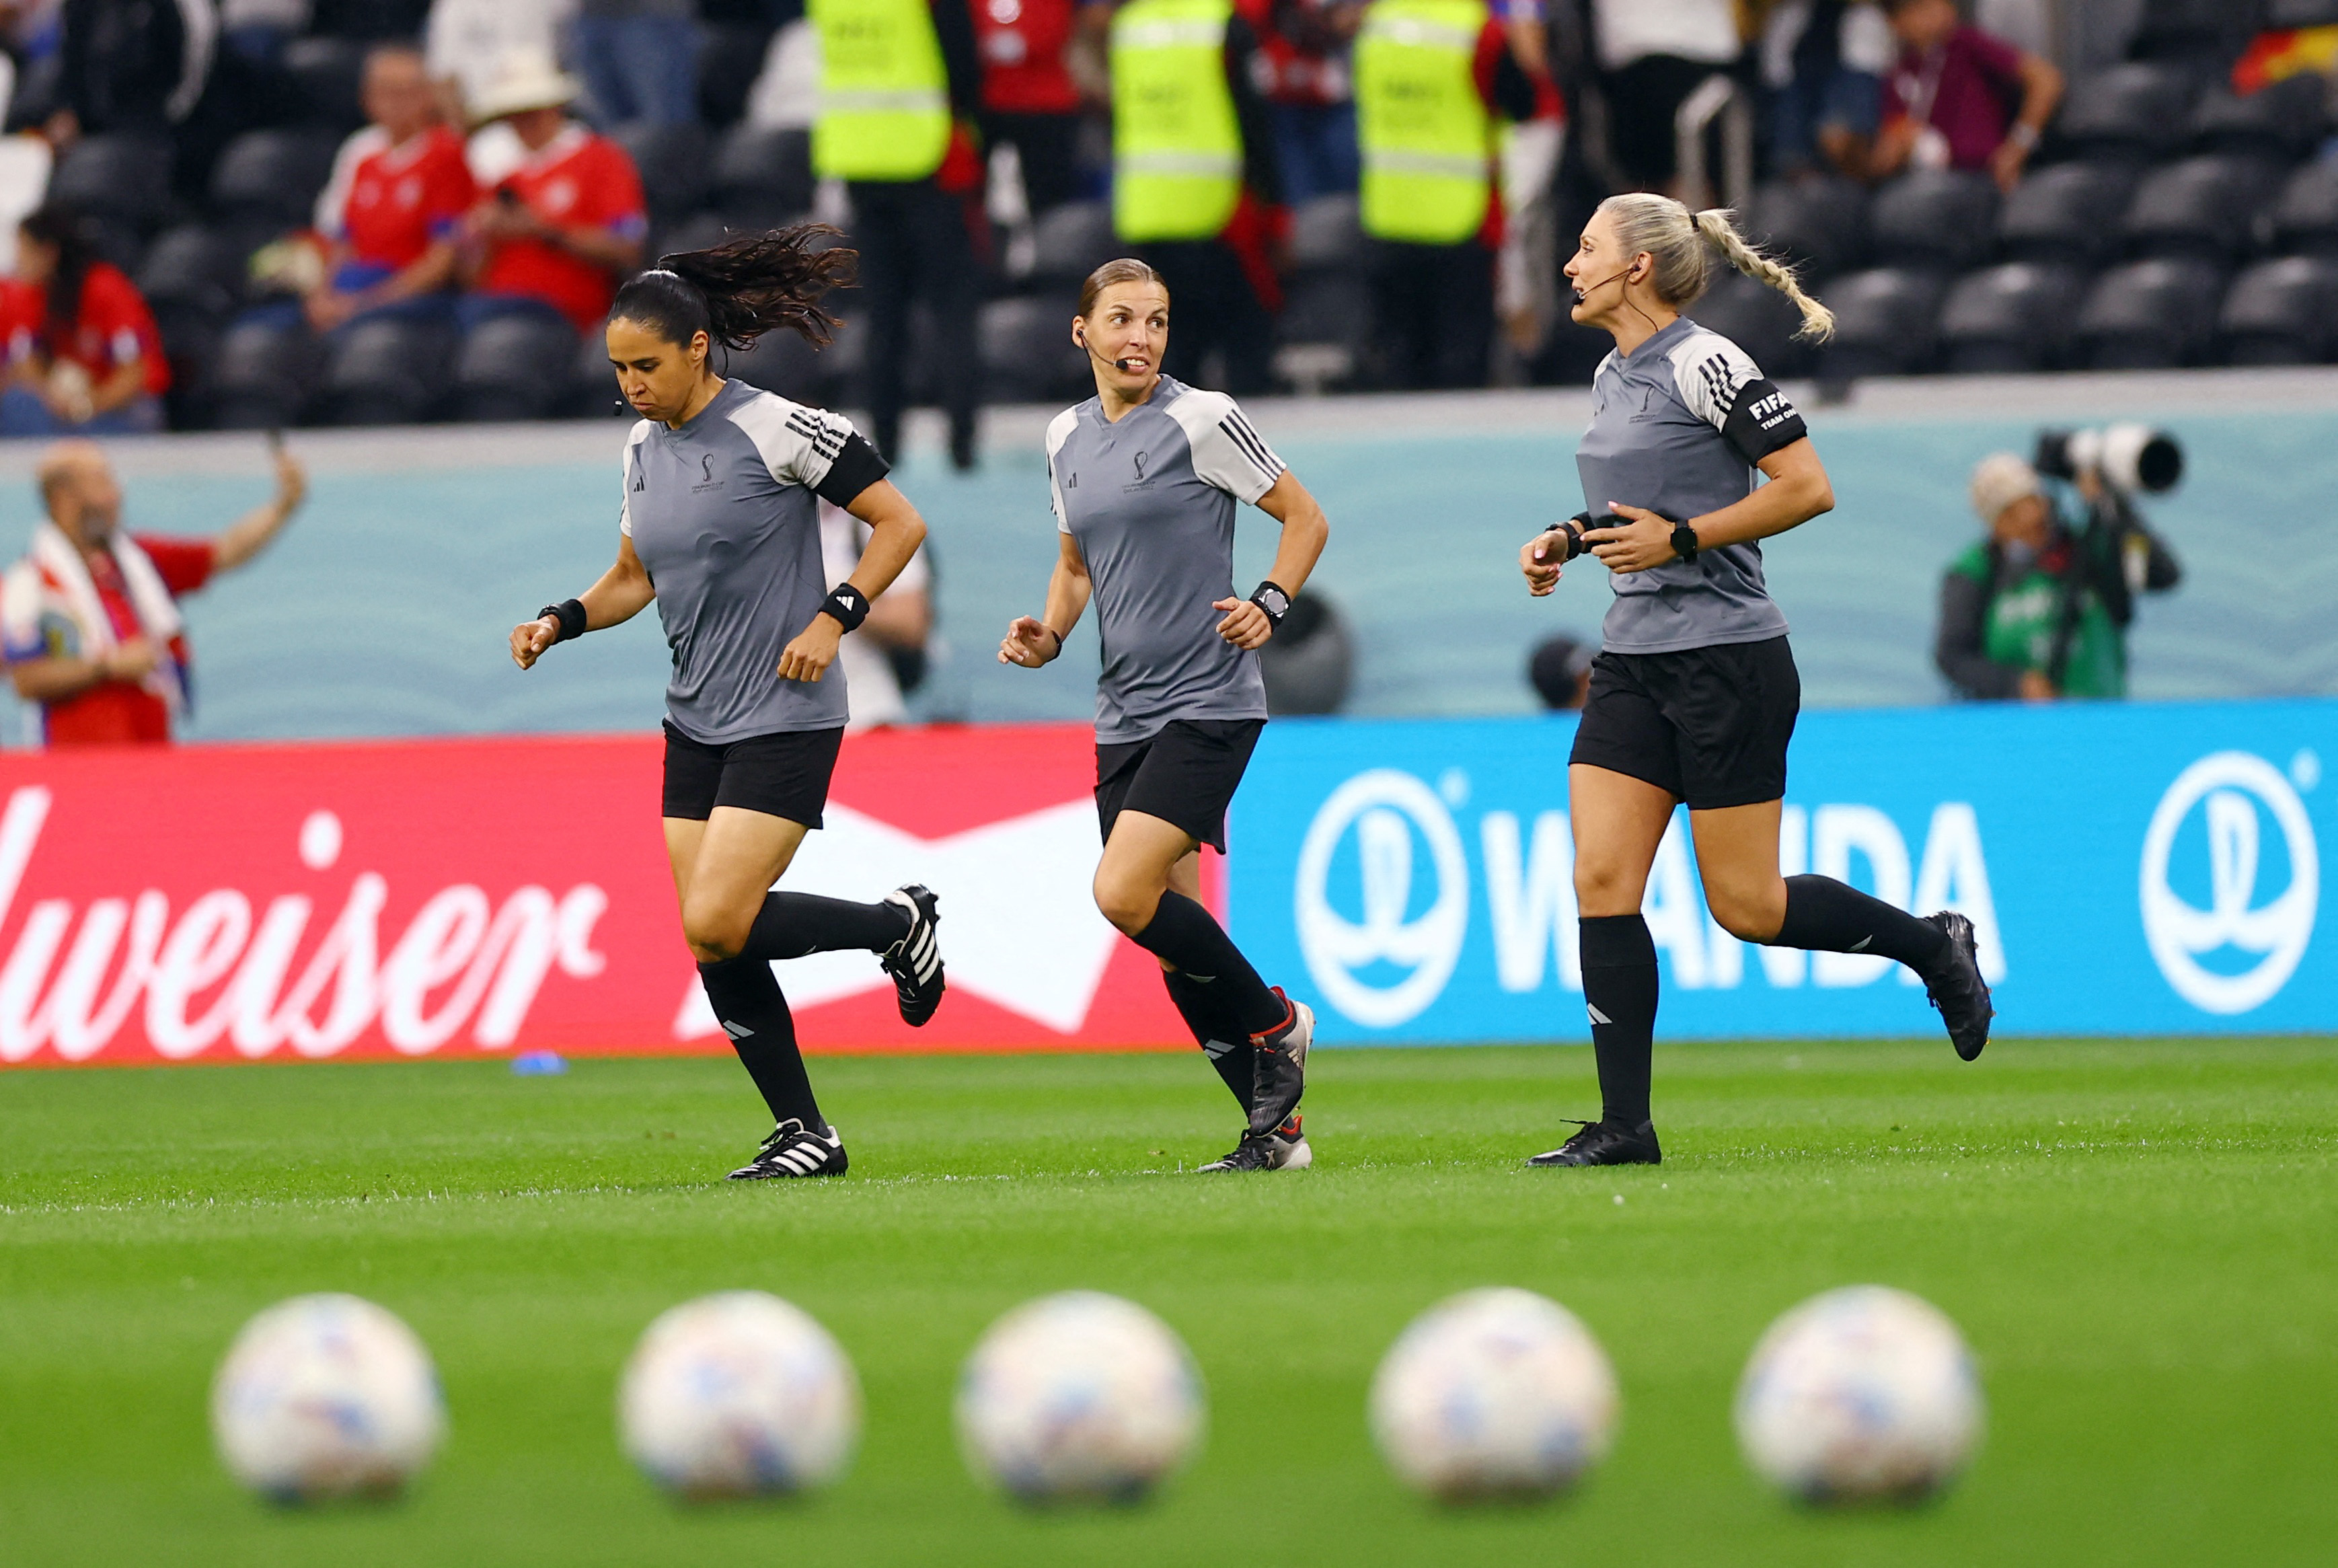 Referee Stéphanie Frappart warms up alongside assistant referees Neuza Back and Karen Diaz Medina before the match between Costa Rica and Germany in Al Bayt Stadium in Al Khor, Qatar on December 1.